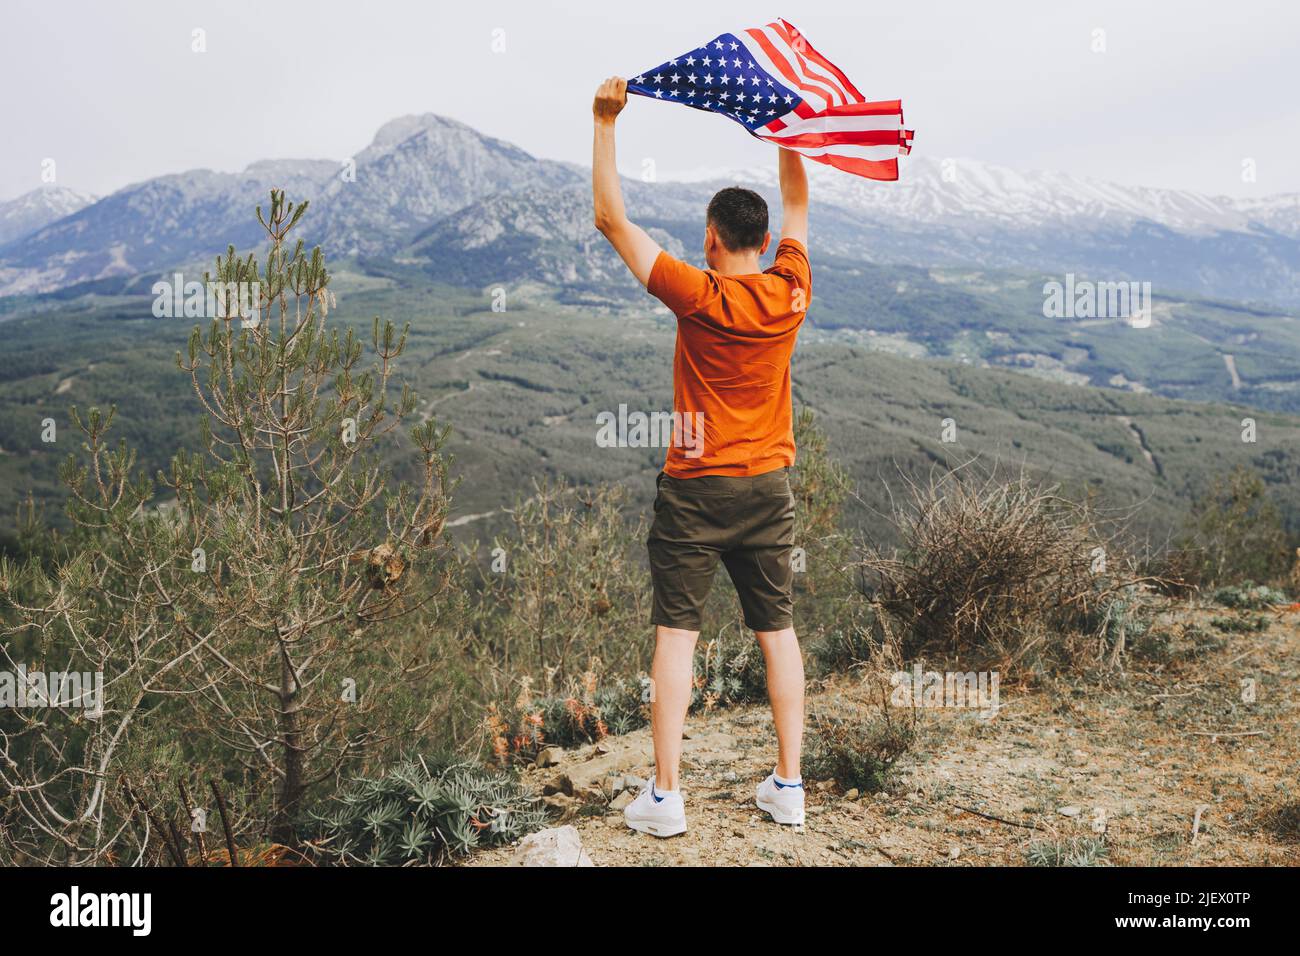 Young man standing on a rock cliff and waving the US flag while looking at mountains in the background. Male traveller waving American flag standing Stock Photo